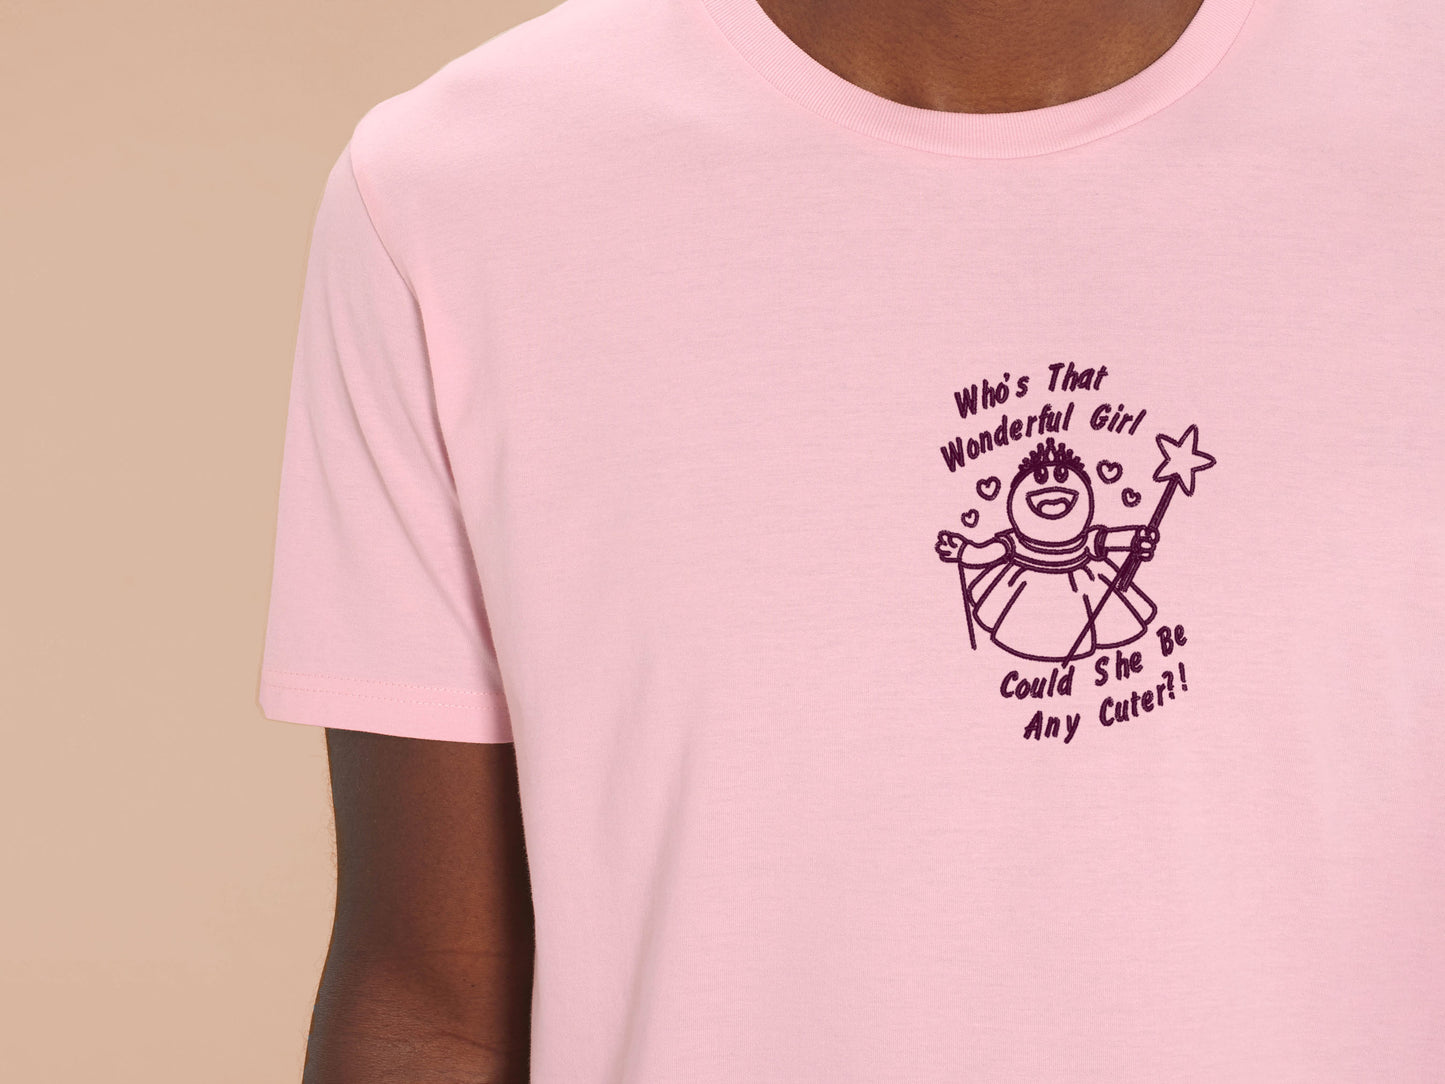 An embroidered t-shirt design of Mona from the puppet show Nanalan in a princess dress with the text Who's That Wonderful Girl, Could She Be Any Cuter?!